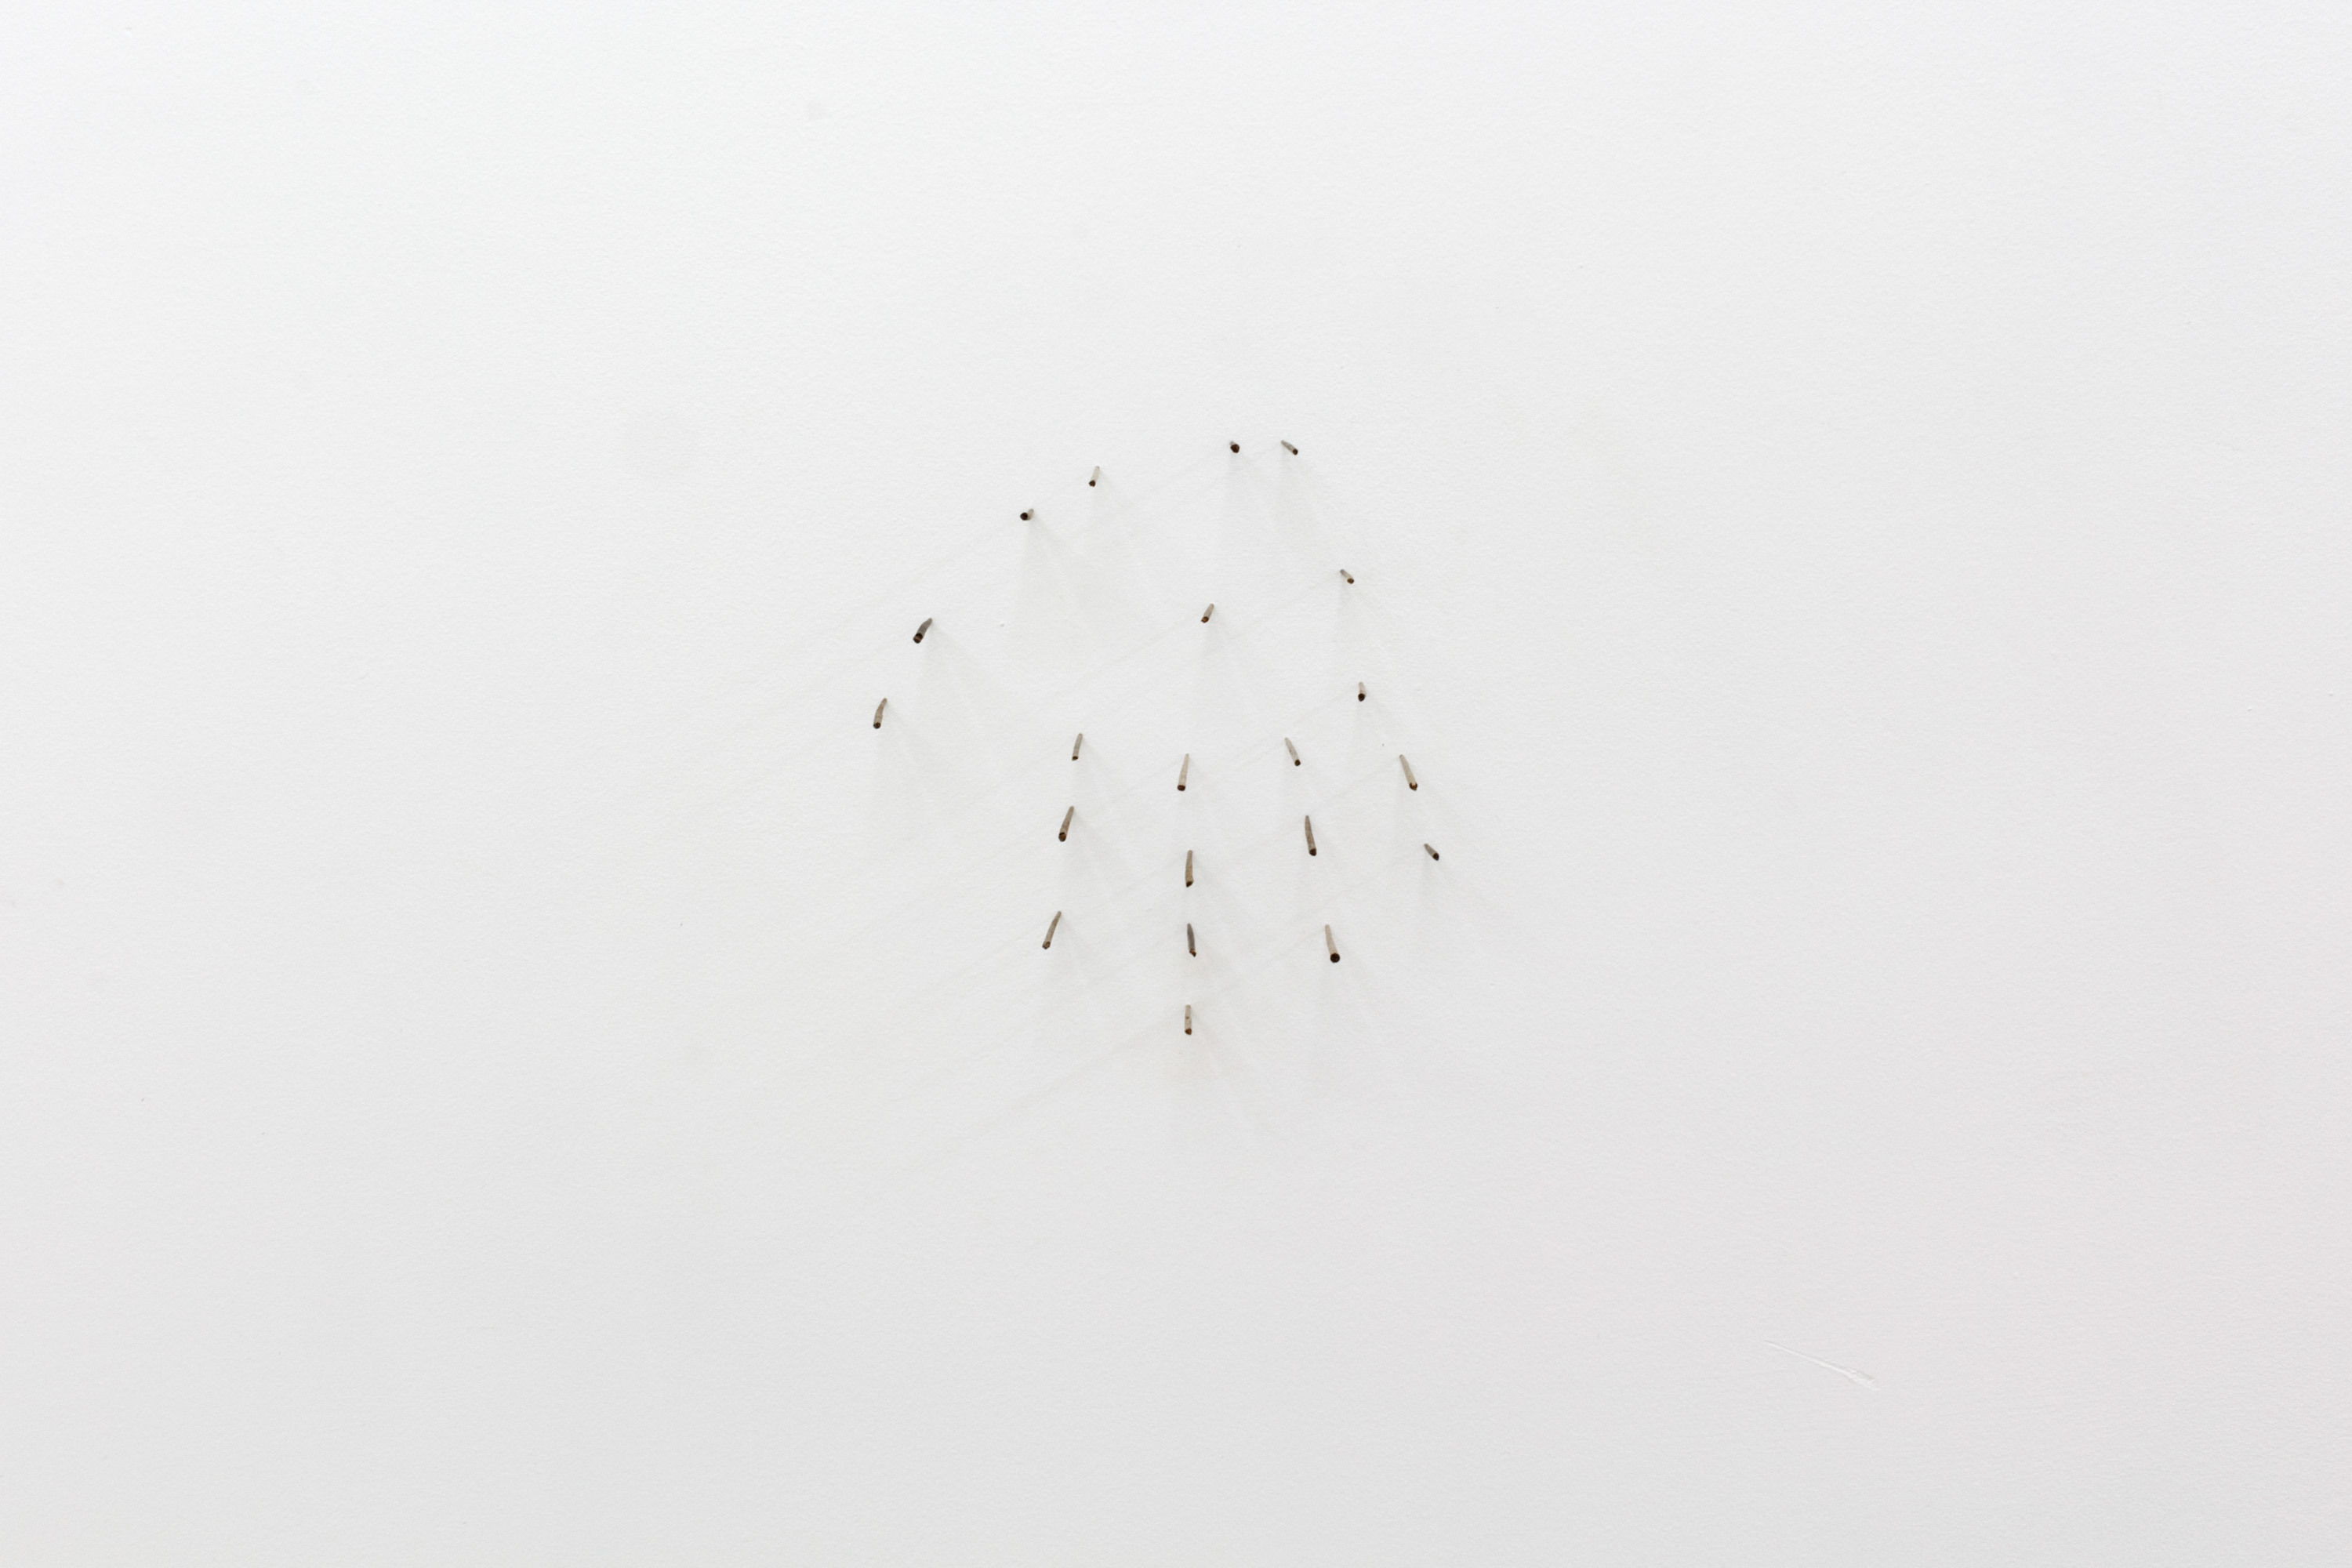 Graham Wiebe, Re-animation, 2022, Reclaimed rainstick needles, Dimensions variable